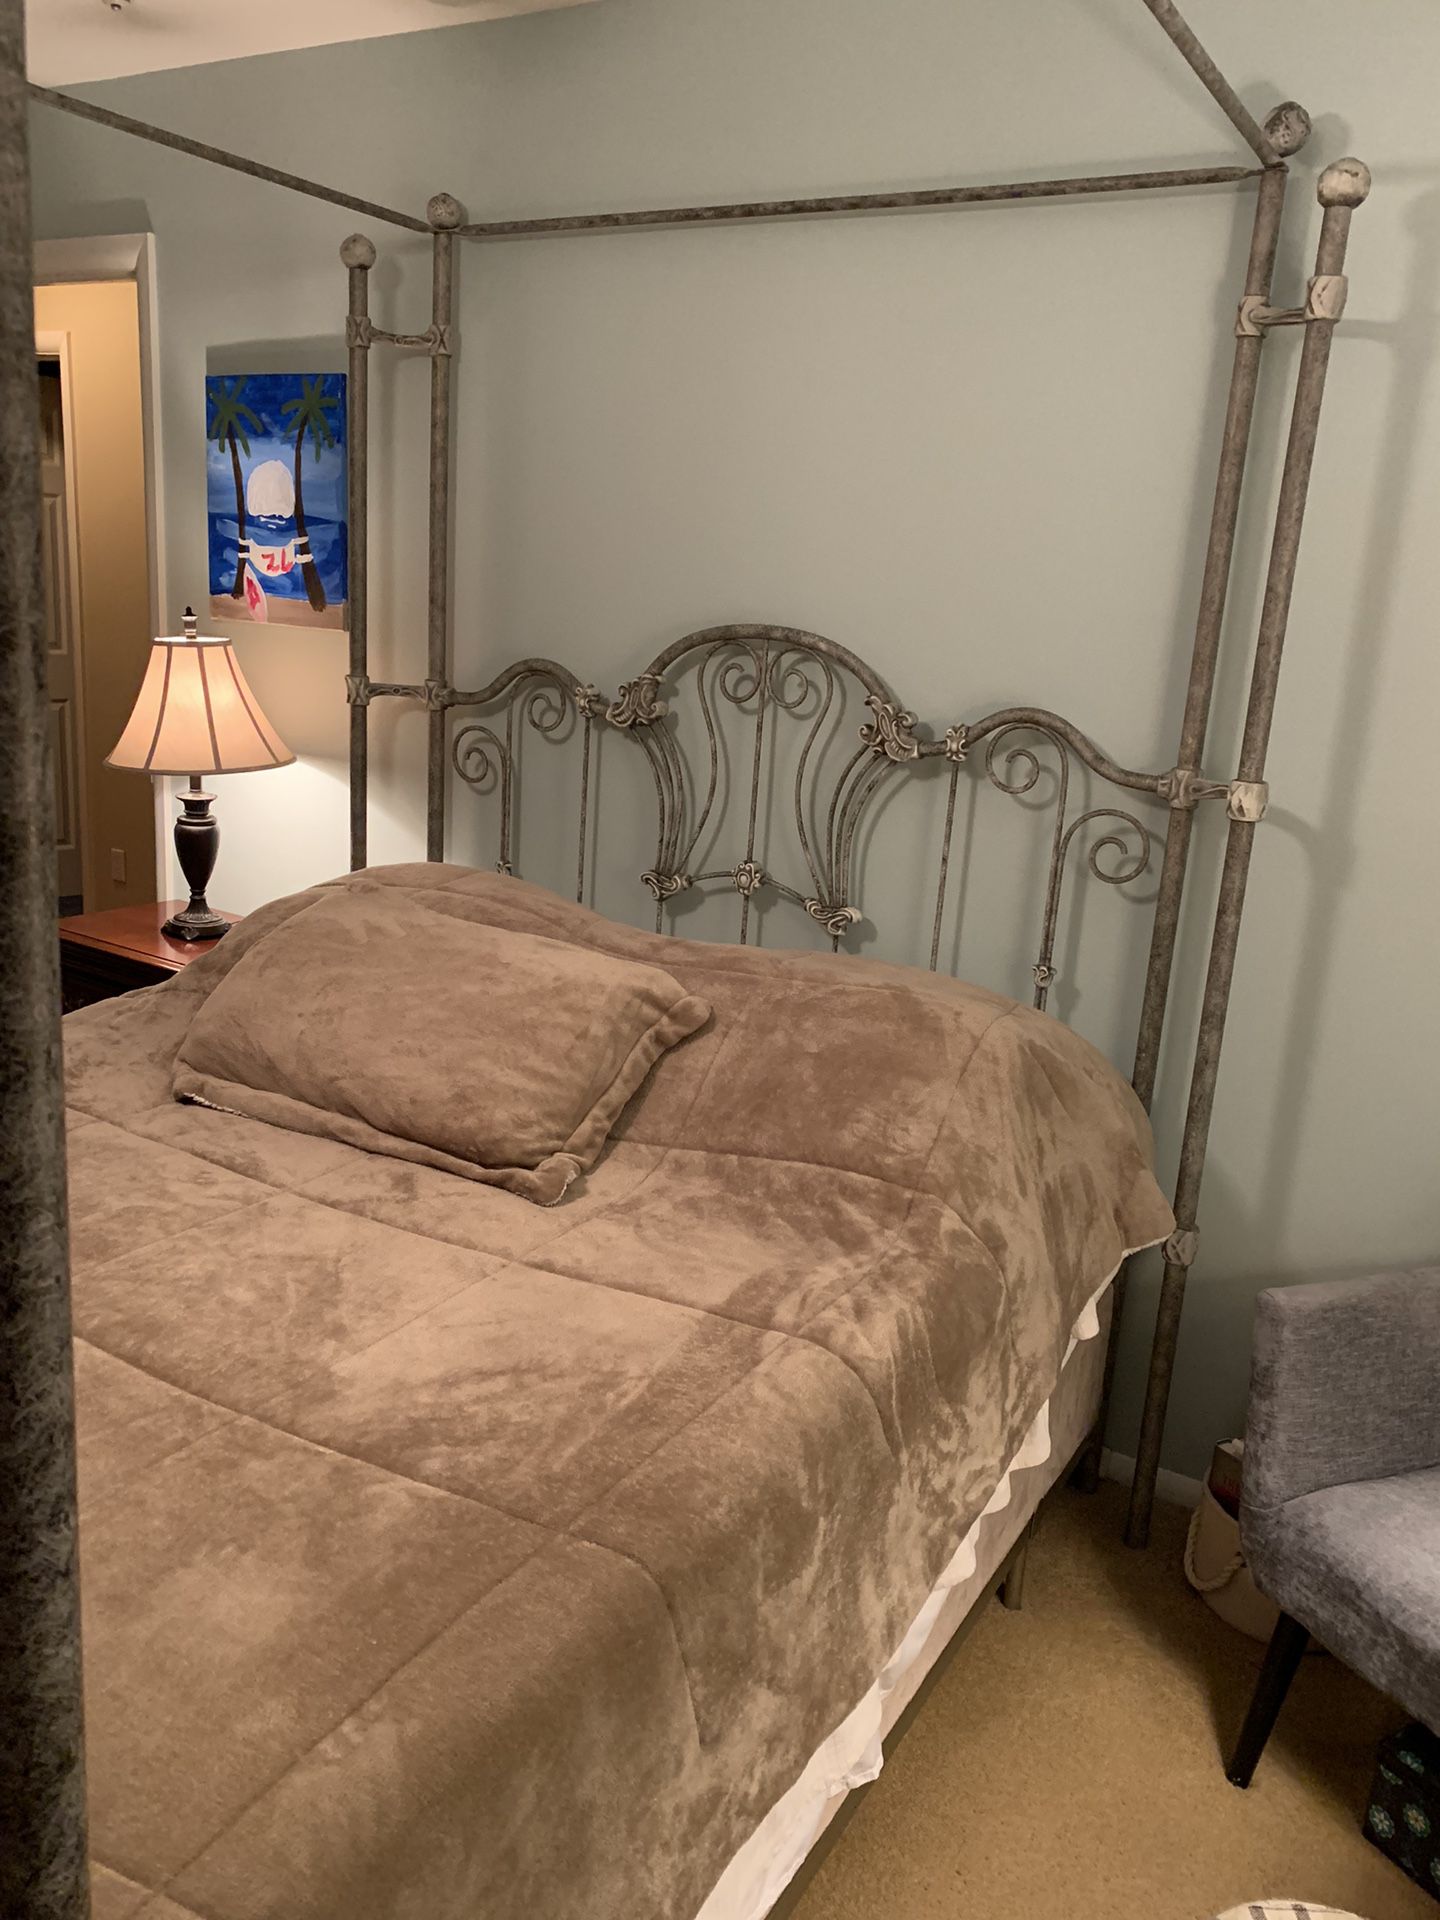 Queen Bed - Wrought Iron Canopy Bed Frame for Sale in Saint-victor 